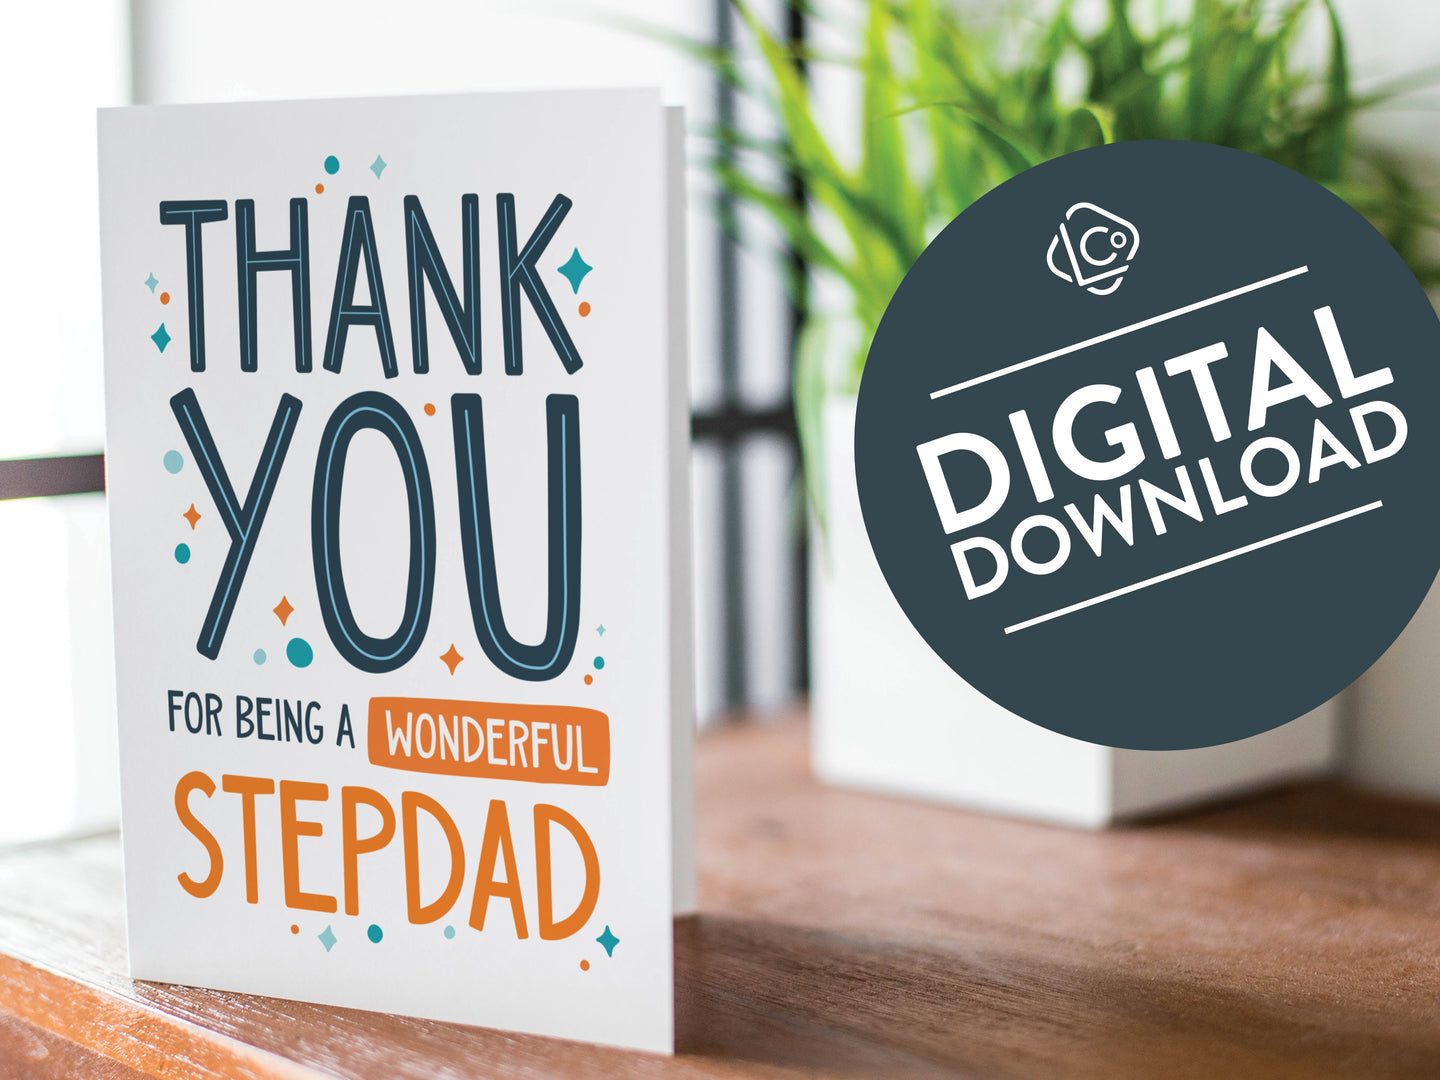 A greeting card is featured on a wood coffee table with a green plant in a white planter in the background. The card features the words “Thank You for Being a Wonderful Stepdad.” The words 